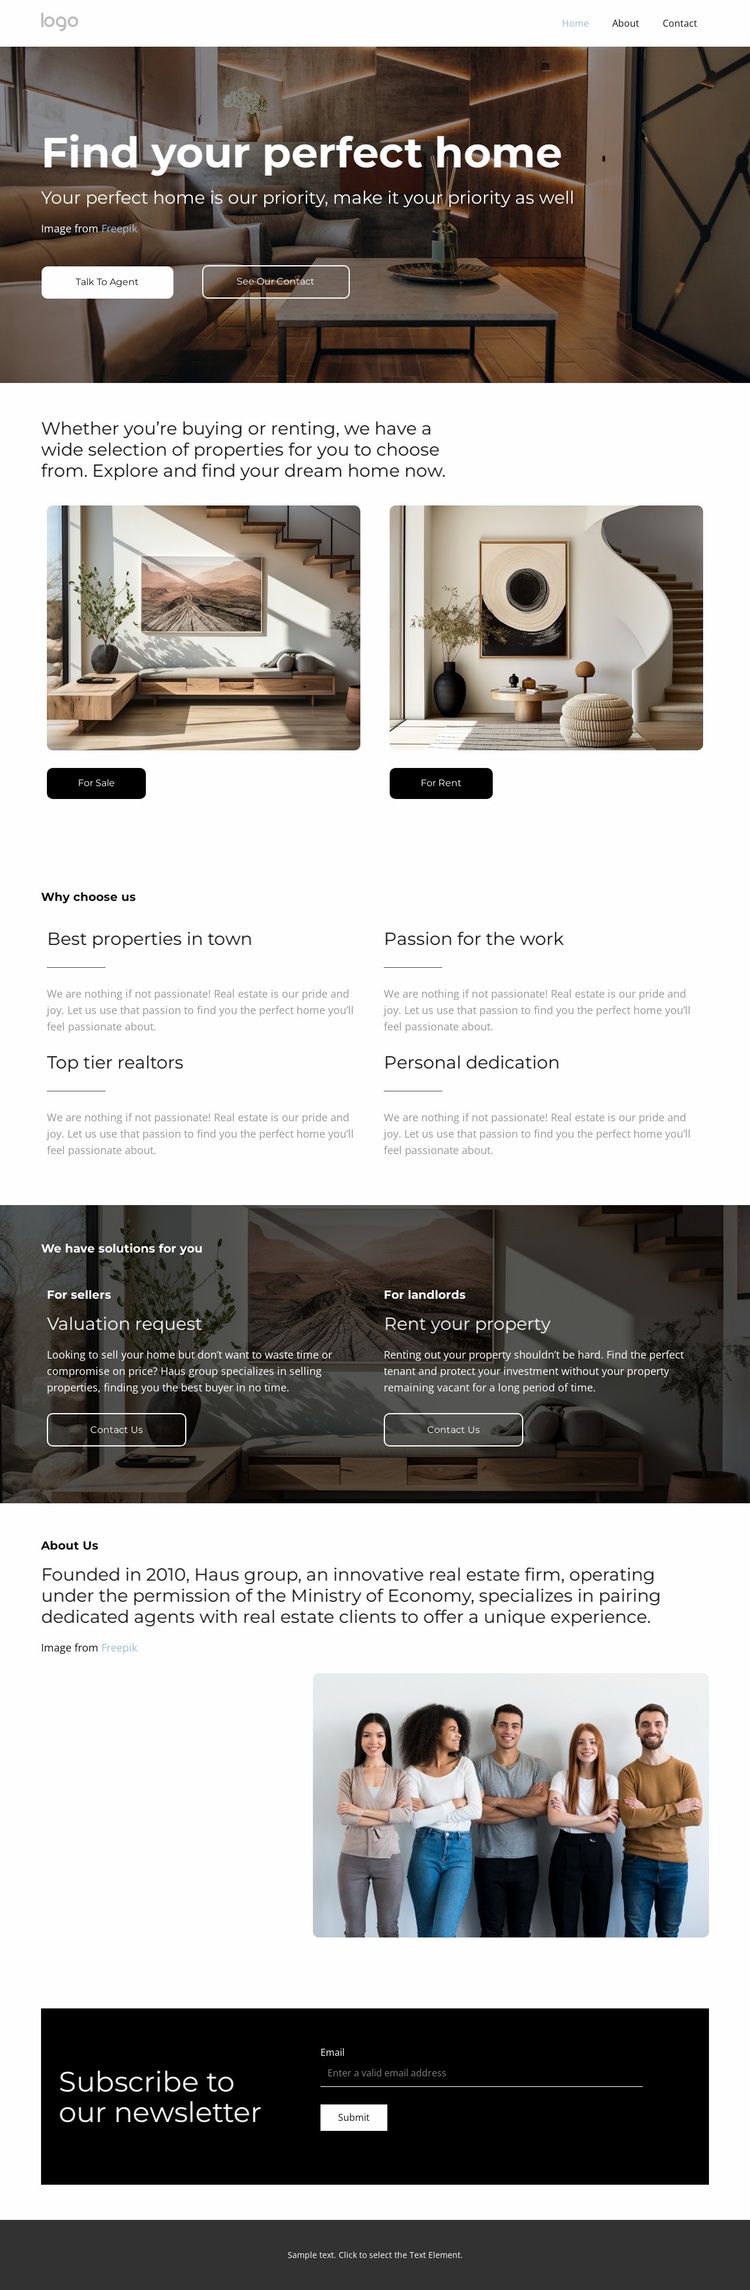 How to pack your stuff Website Template